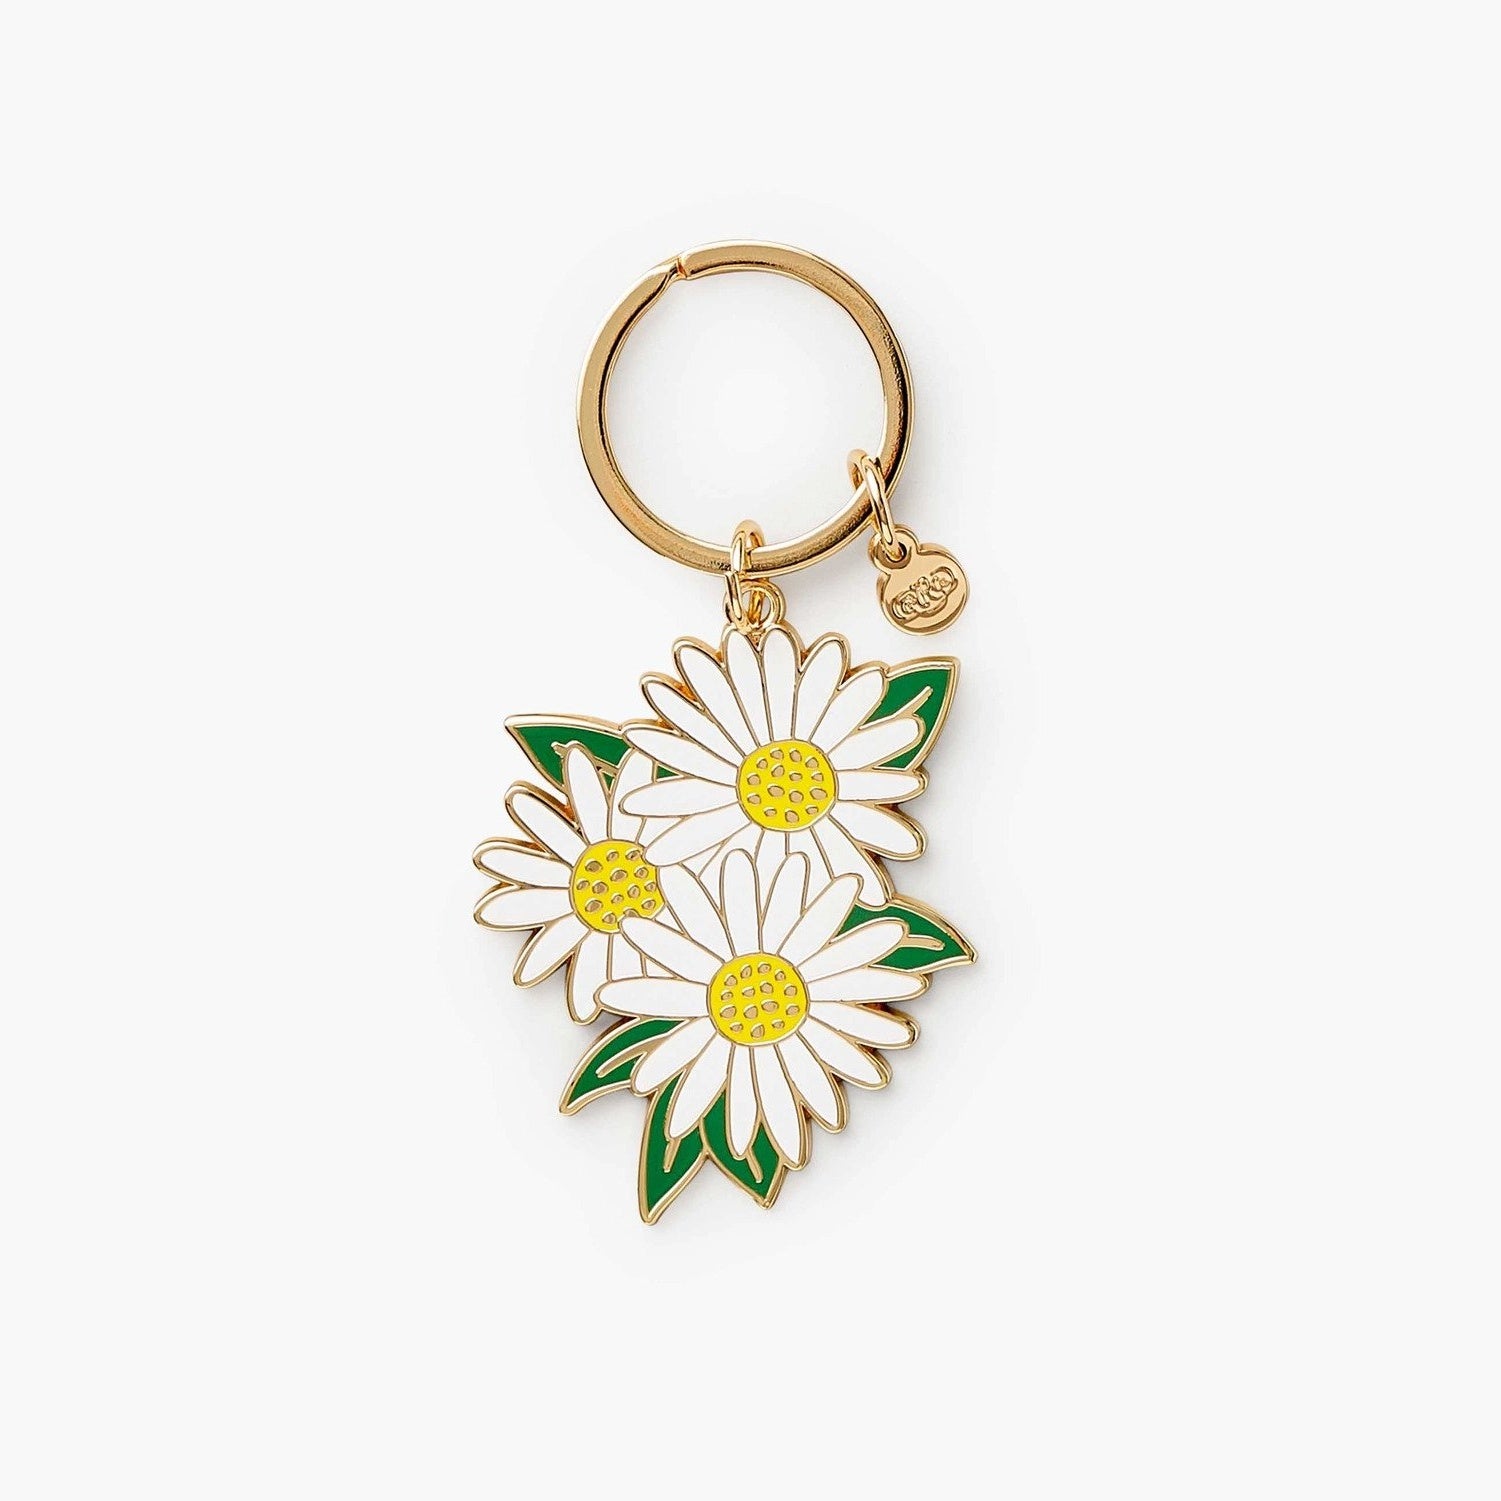 Three white daisies with yellow centers on a gold key ring.